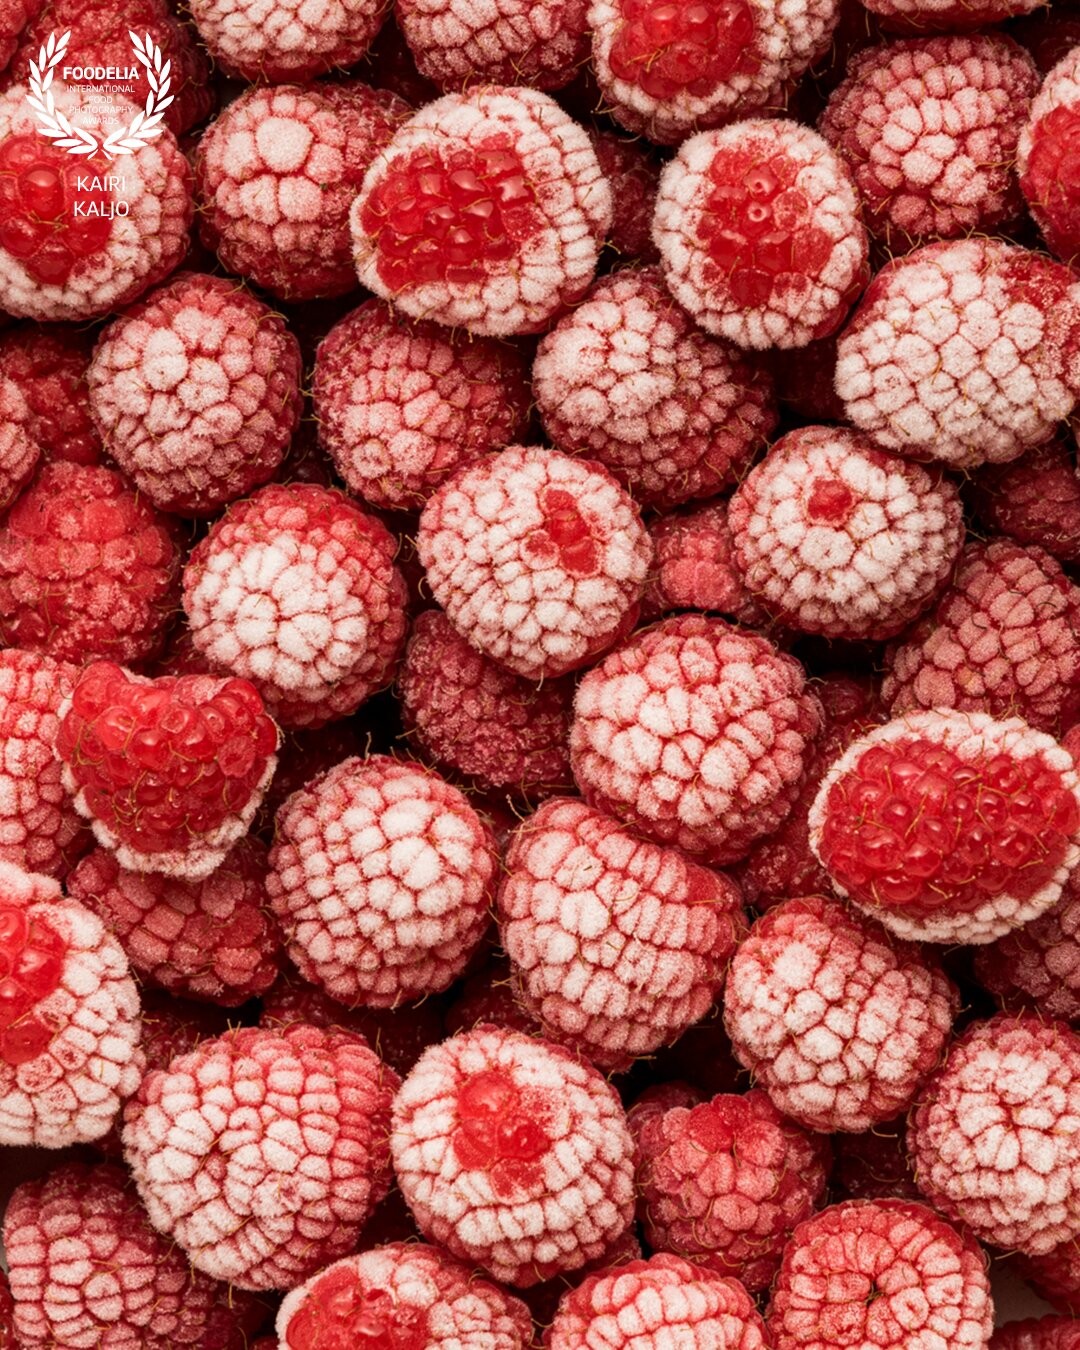 Raspberries are one of my favourite subjects to capture. Usually I use them as part of the styling or to decorate cakes and desserts with but this time it was all about berries and the journey from frozen to thawed. Love the versatile texture of frost and berries combined.